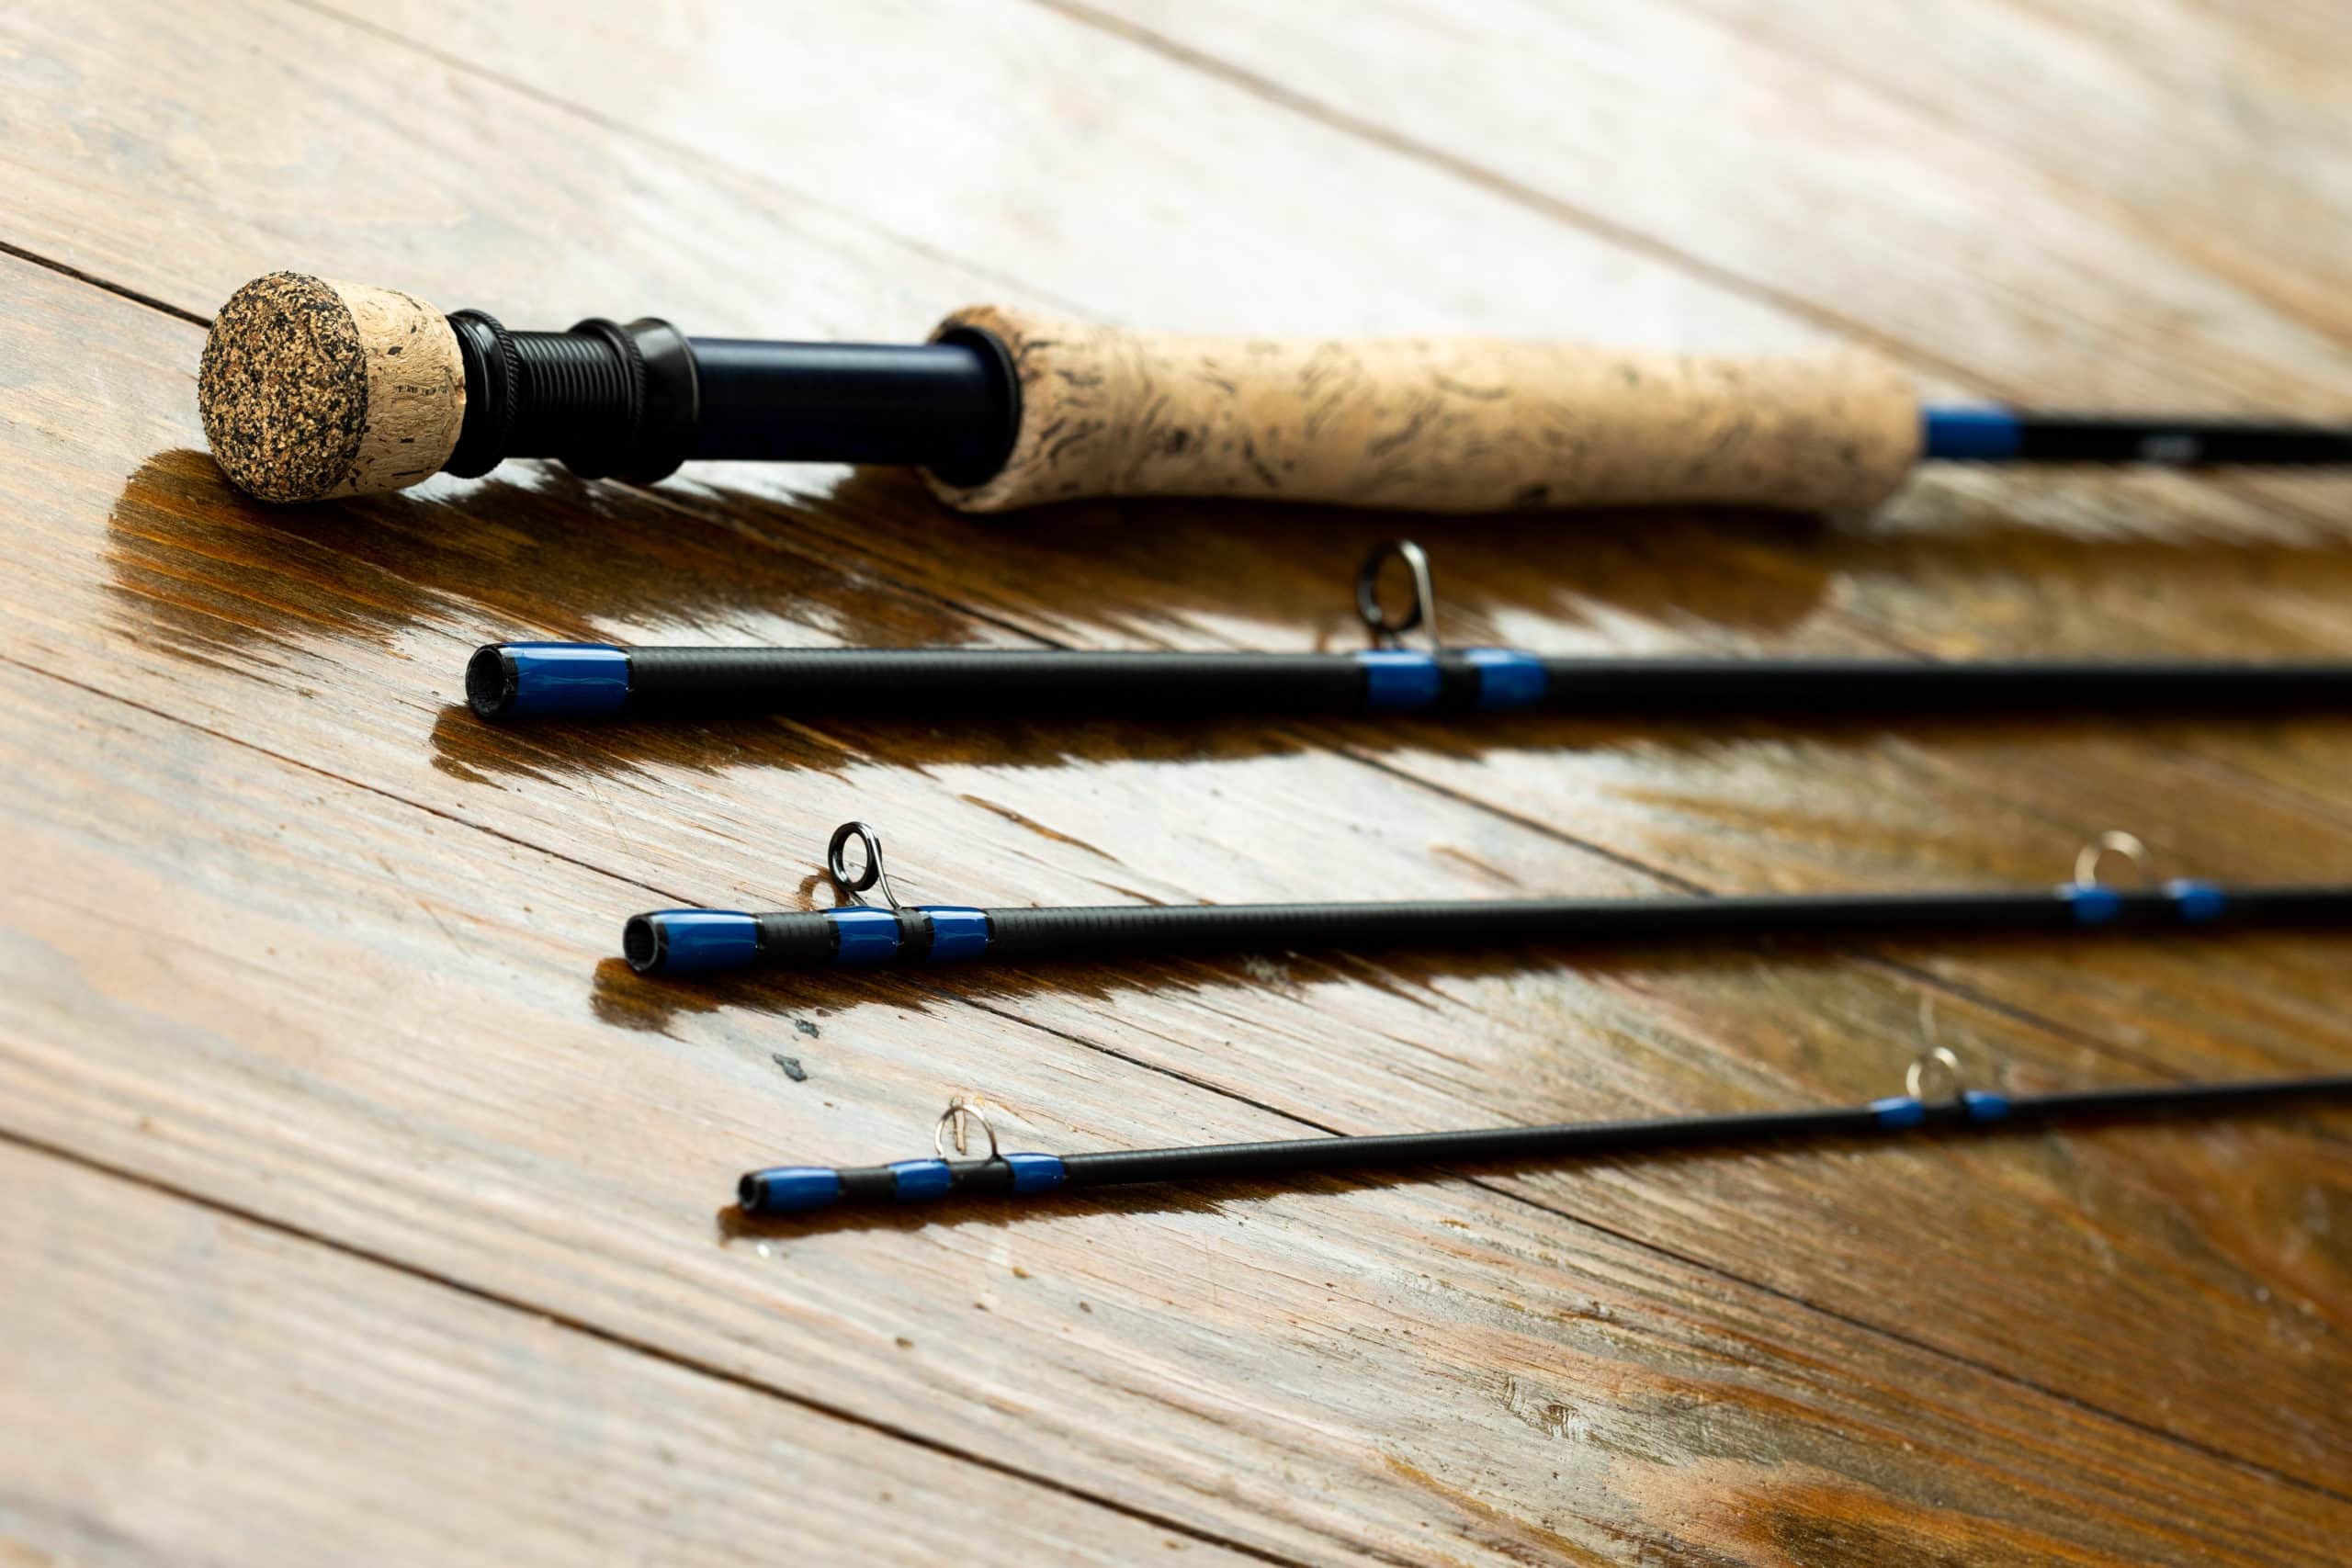 Justin Nguyen Everglade Series - Fast Action Fly Rod